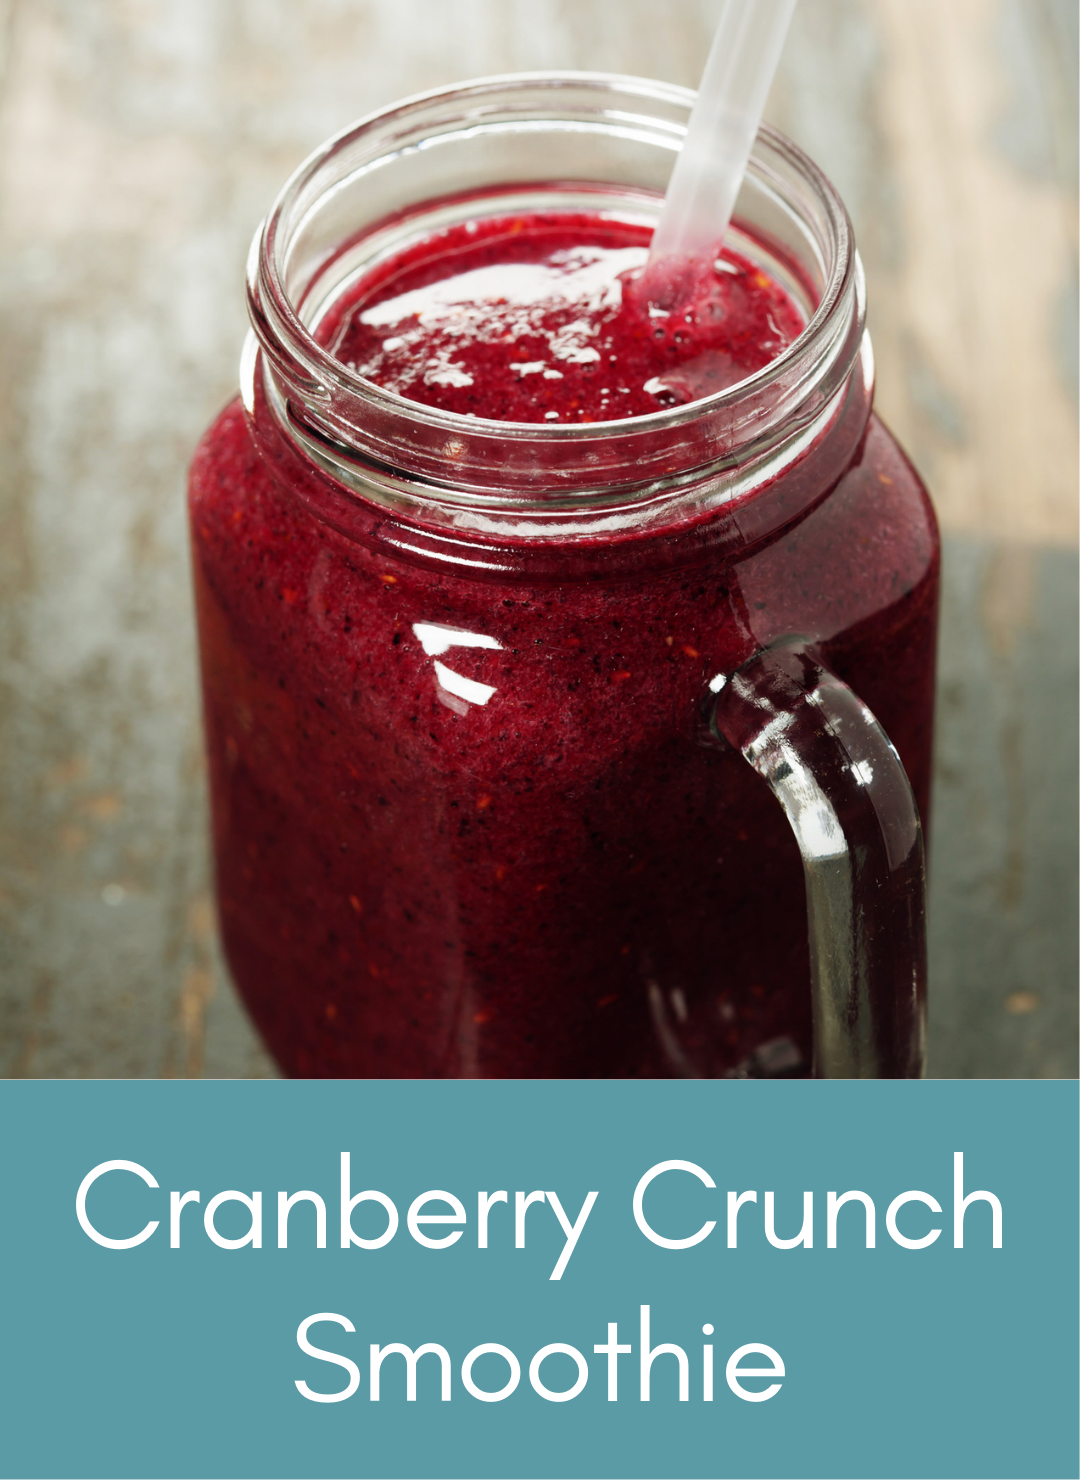 Cranberry crunch vegan smoothie Picture with link to recipe